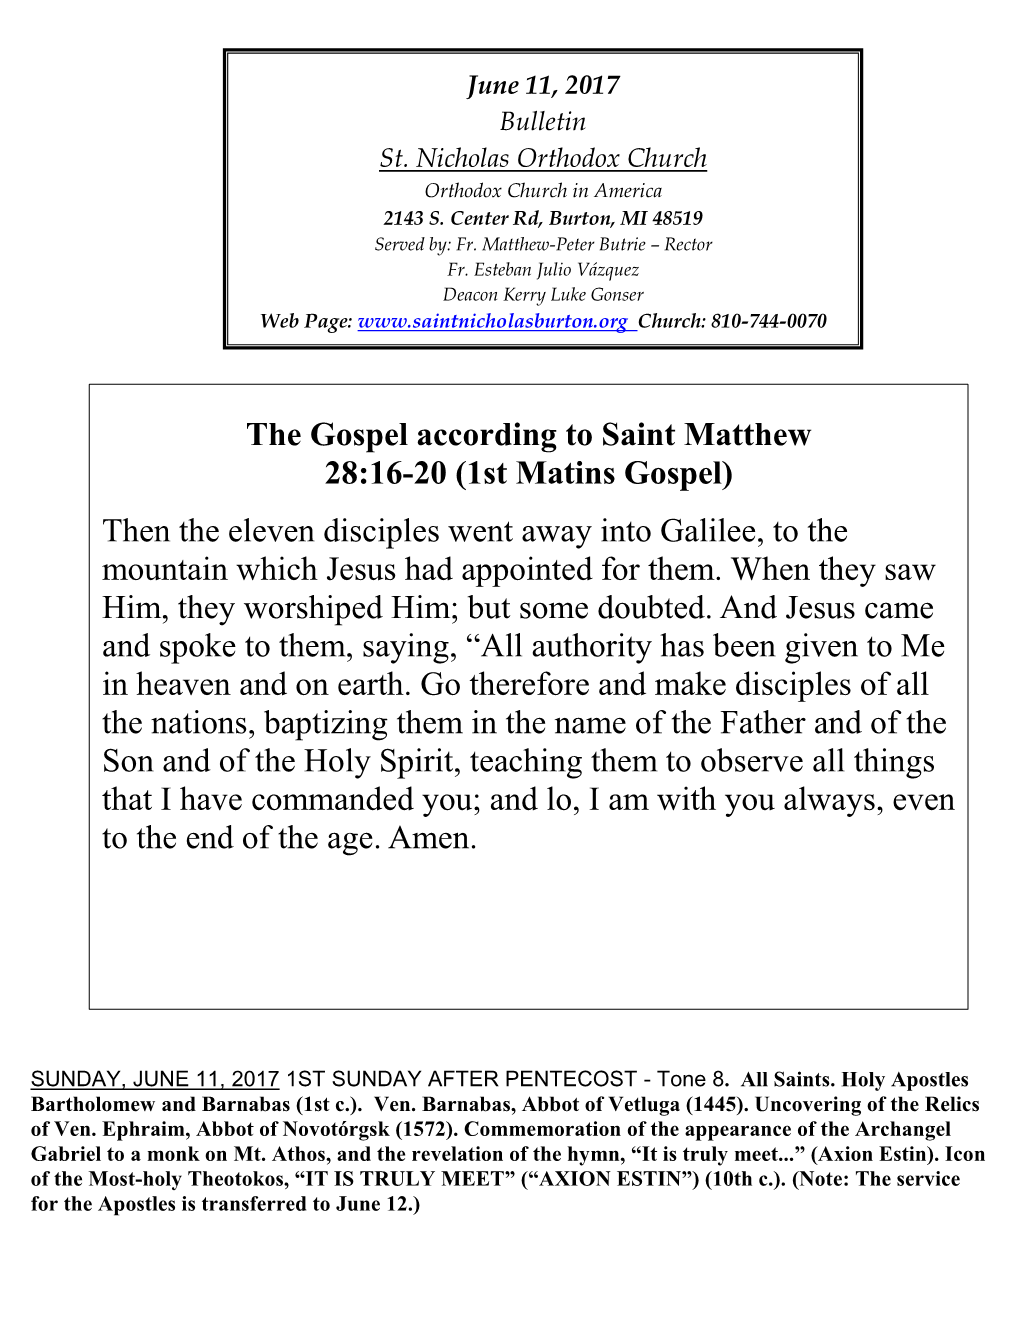 (1St Matins Gospel) Then the Eleven Disciples Went Away Into Galilee, To